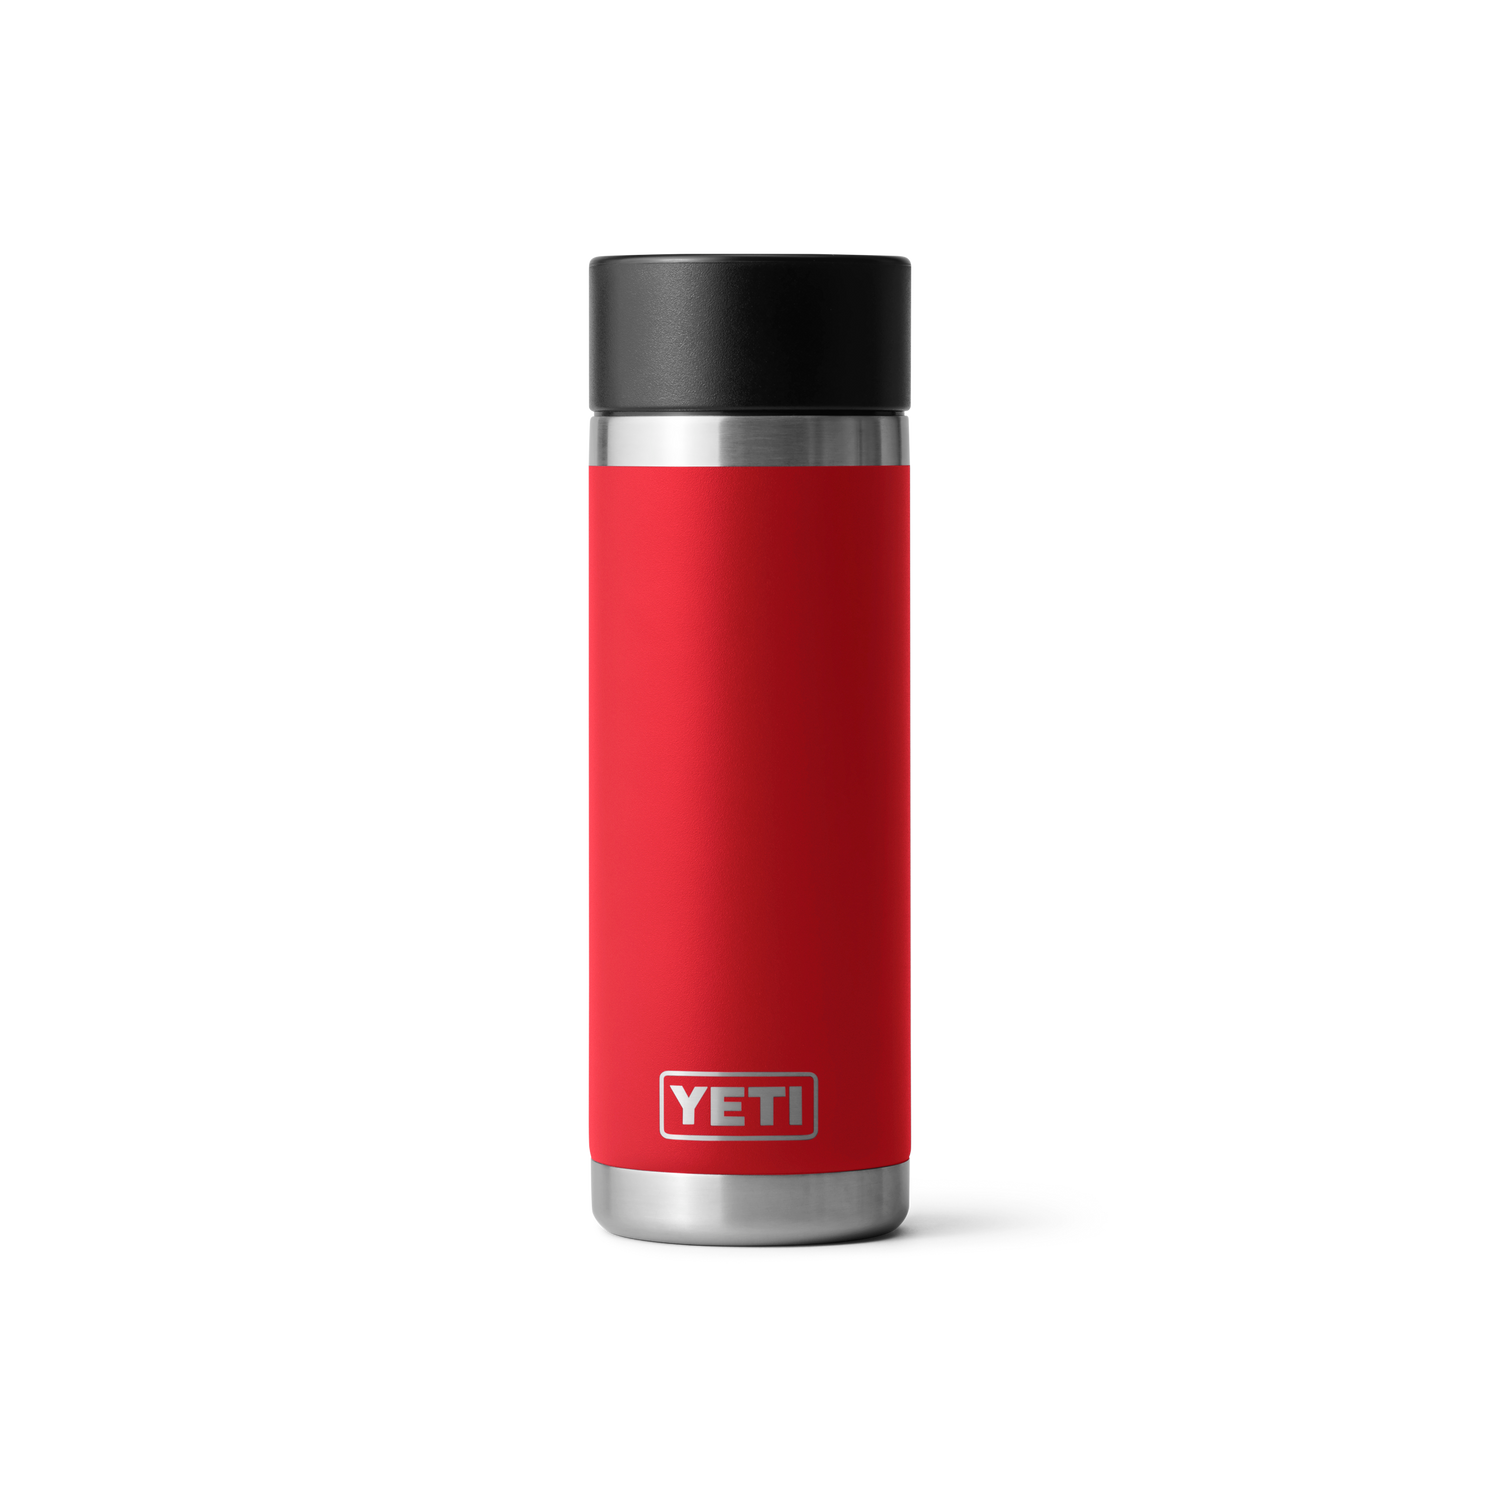 REAL YETI 35 Oz. Rambler With Straw Lid Laser Engraved Rescue Red Stainless  Steel Yeti Rambler Vacuum Insulated YETI 